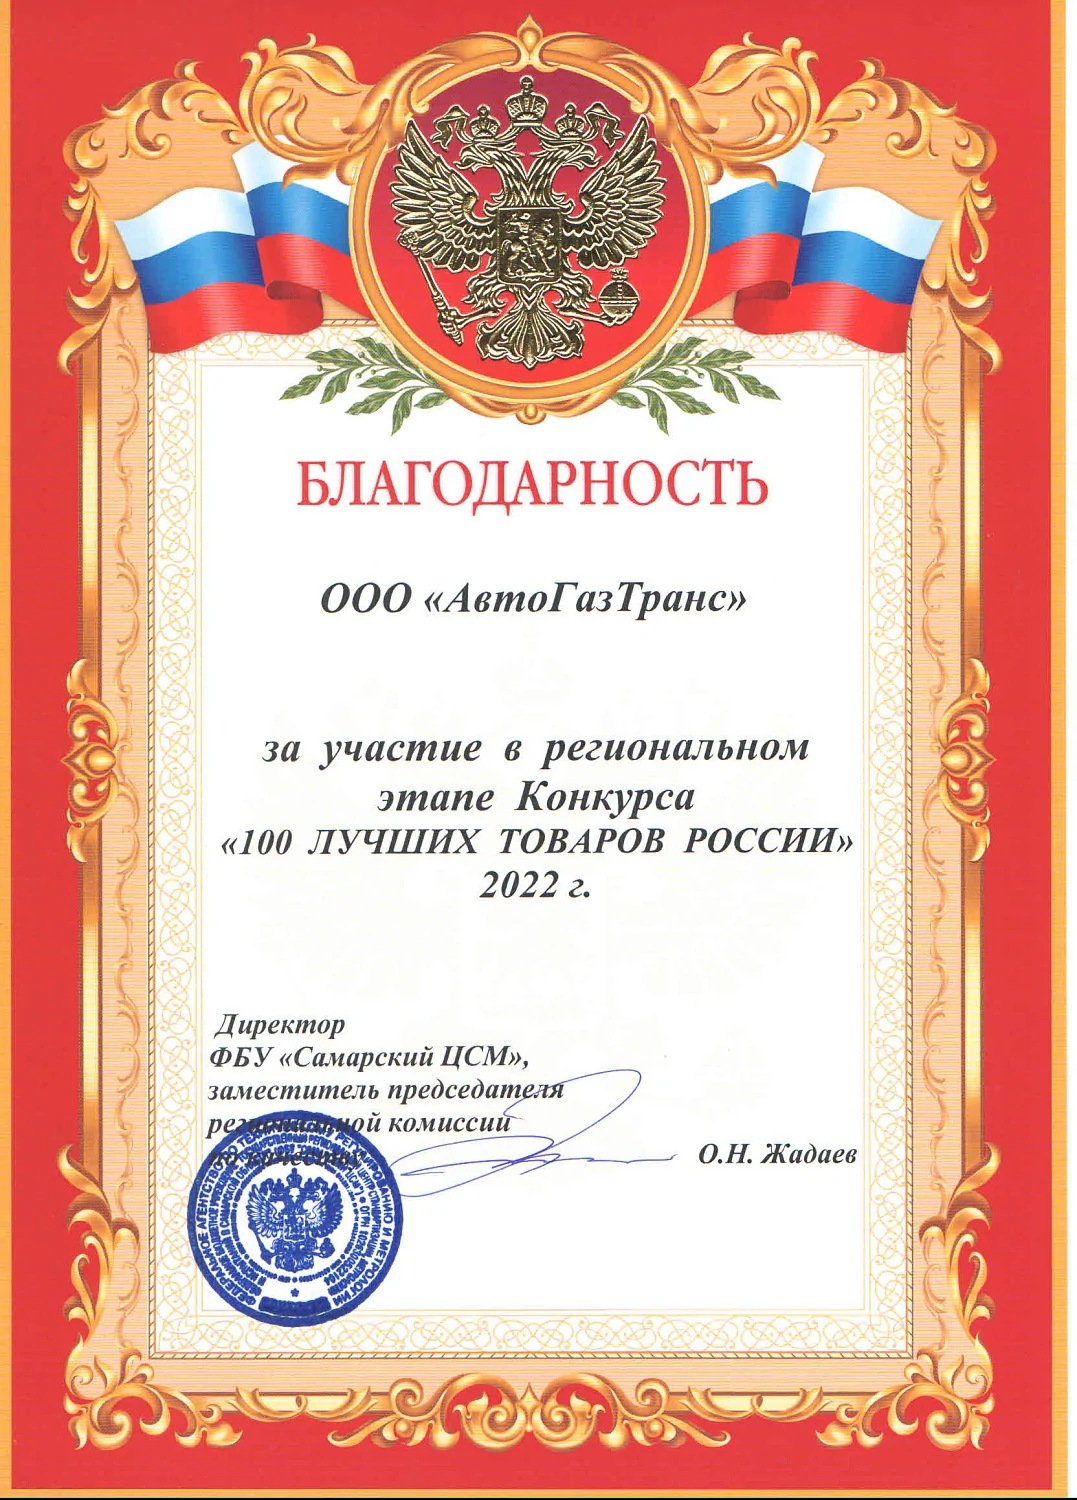 LLC "AvtoGazTrans" is a diploma winner of the competition "100 Best Goods of Russia-2022"